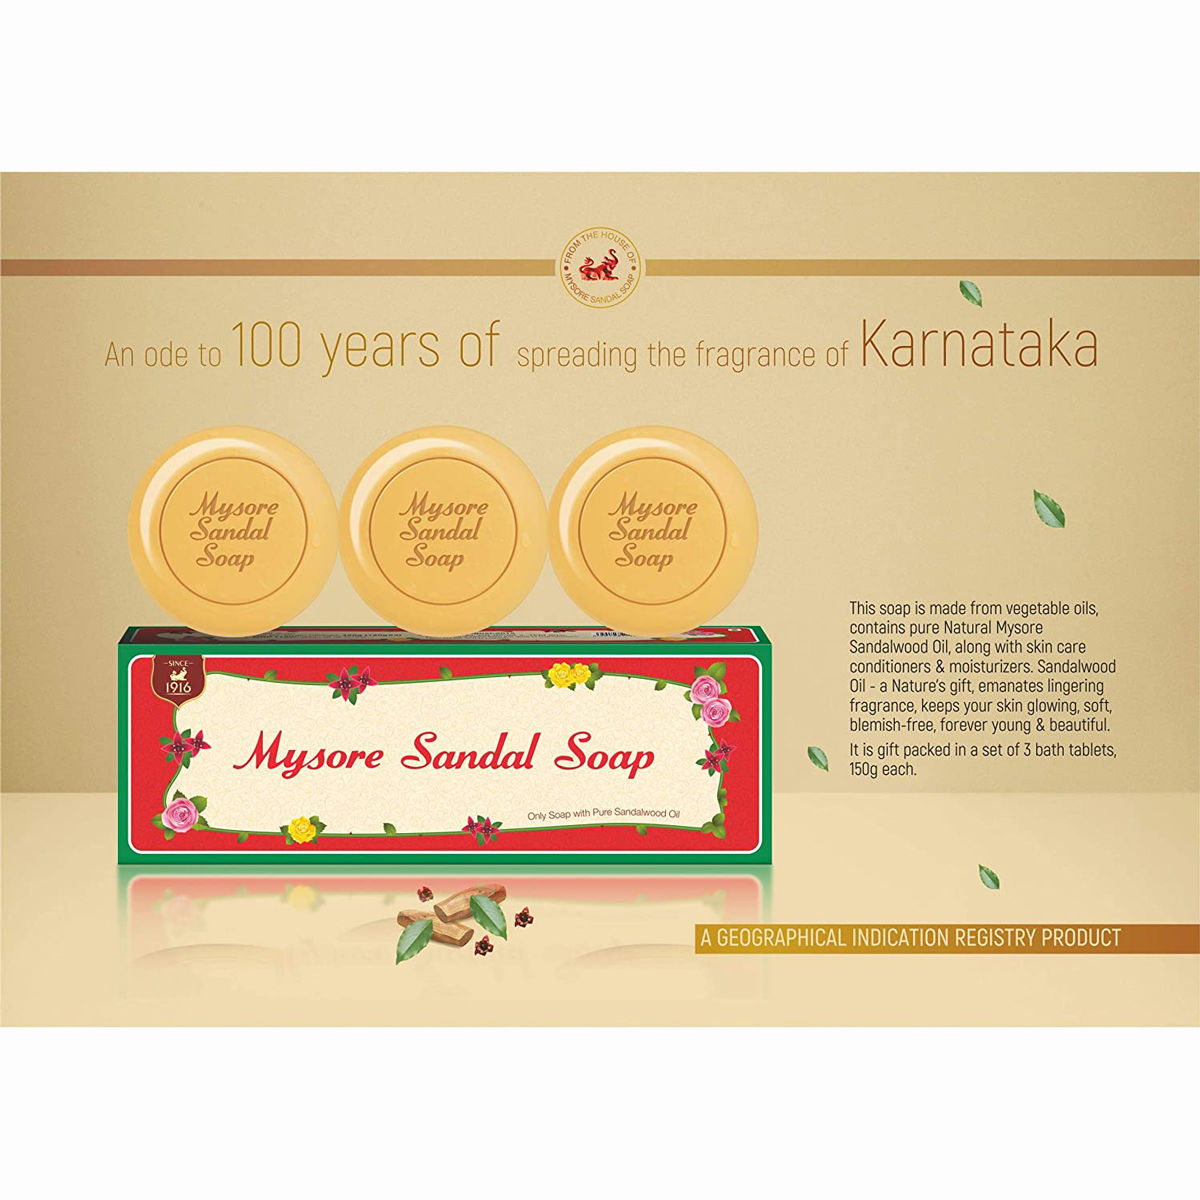 Mysore Sandal Soap png images | PNGWing